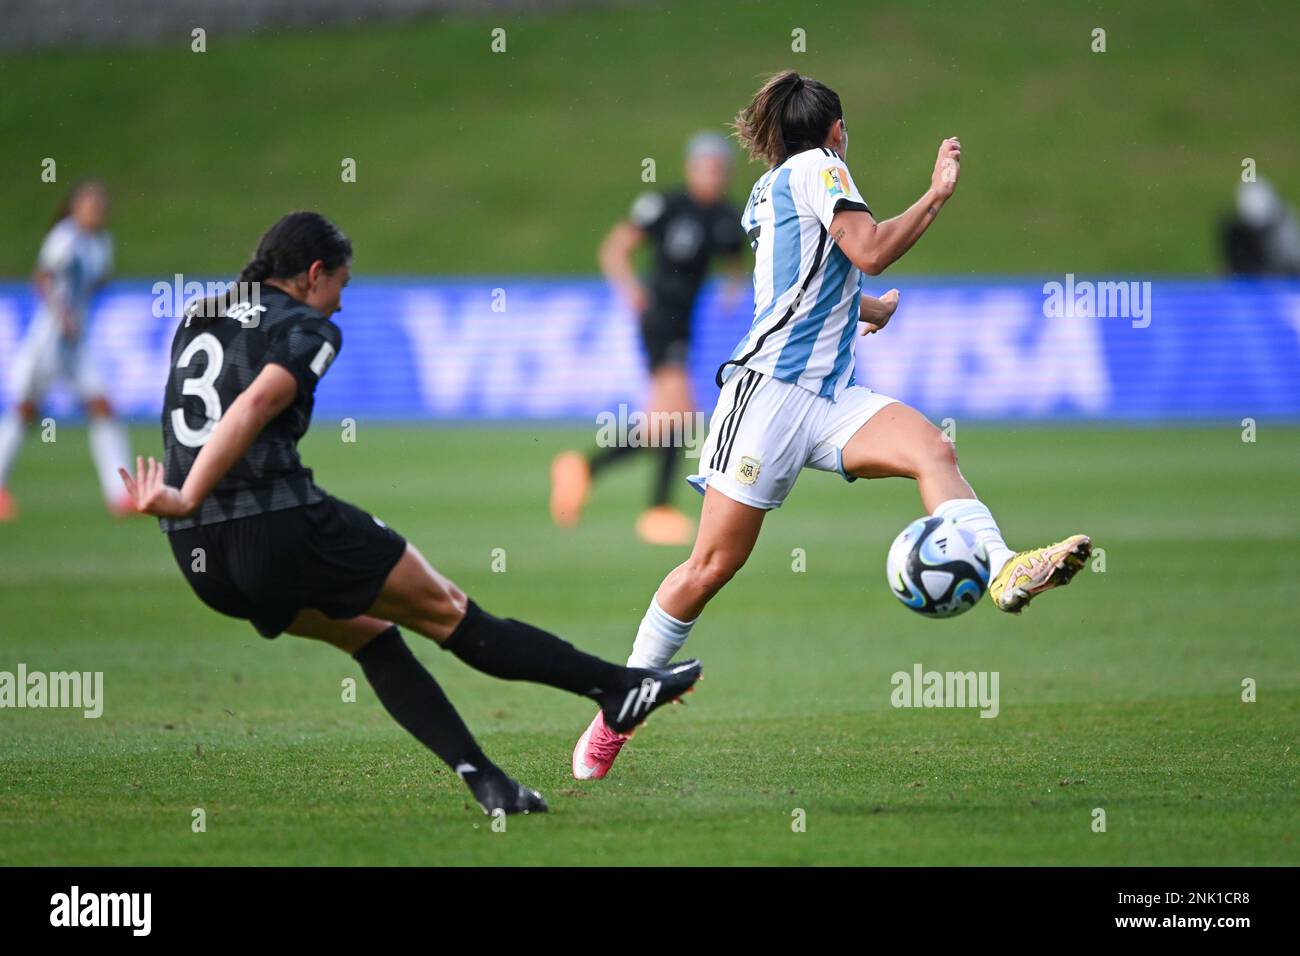 Auckland, New Zealand. 23rd Feb, 2023. Claudia Bunge (L) of New Zealand National Women's soccer team and Romina Nunez (R) of Argentina National Women's soccer team in action during the FIFA Women's World Cup 2023 friendly game between Argentina and New Zealand held at the North Harbour Stadium. Final score: Argentina 1:0 New Zealand. Credit: SOPA Images Limited/Alamy Live News Stock Photo